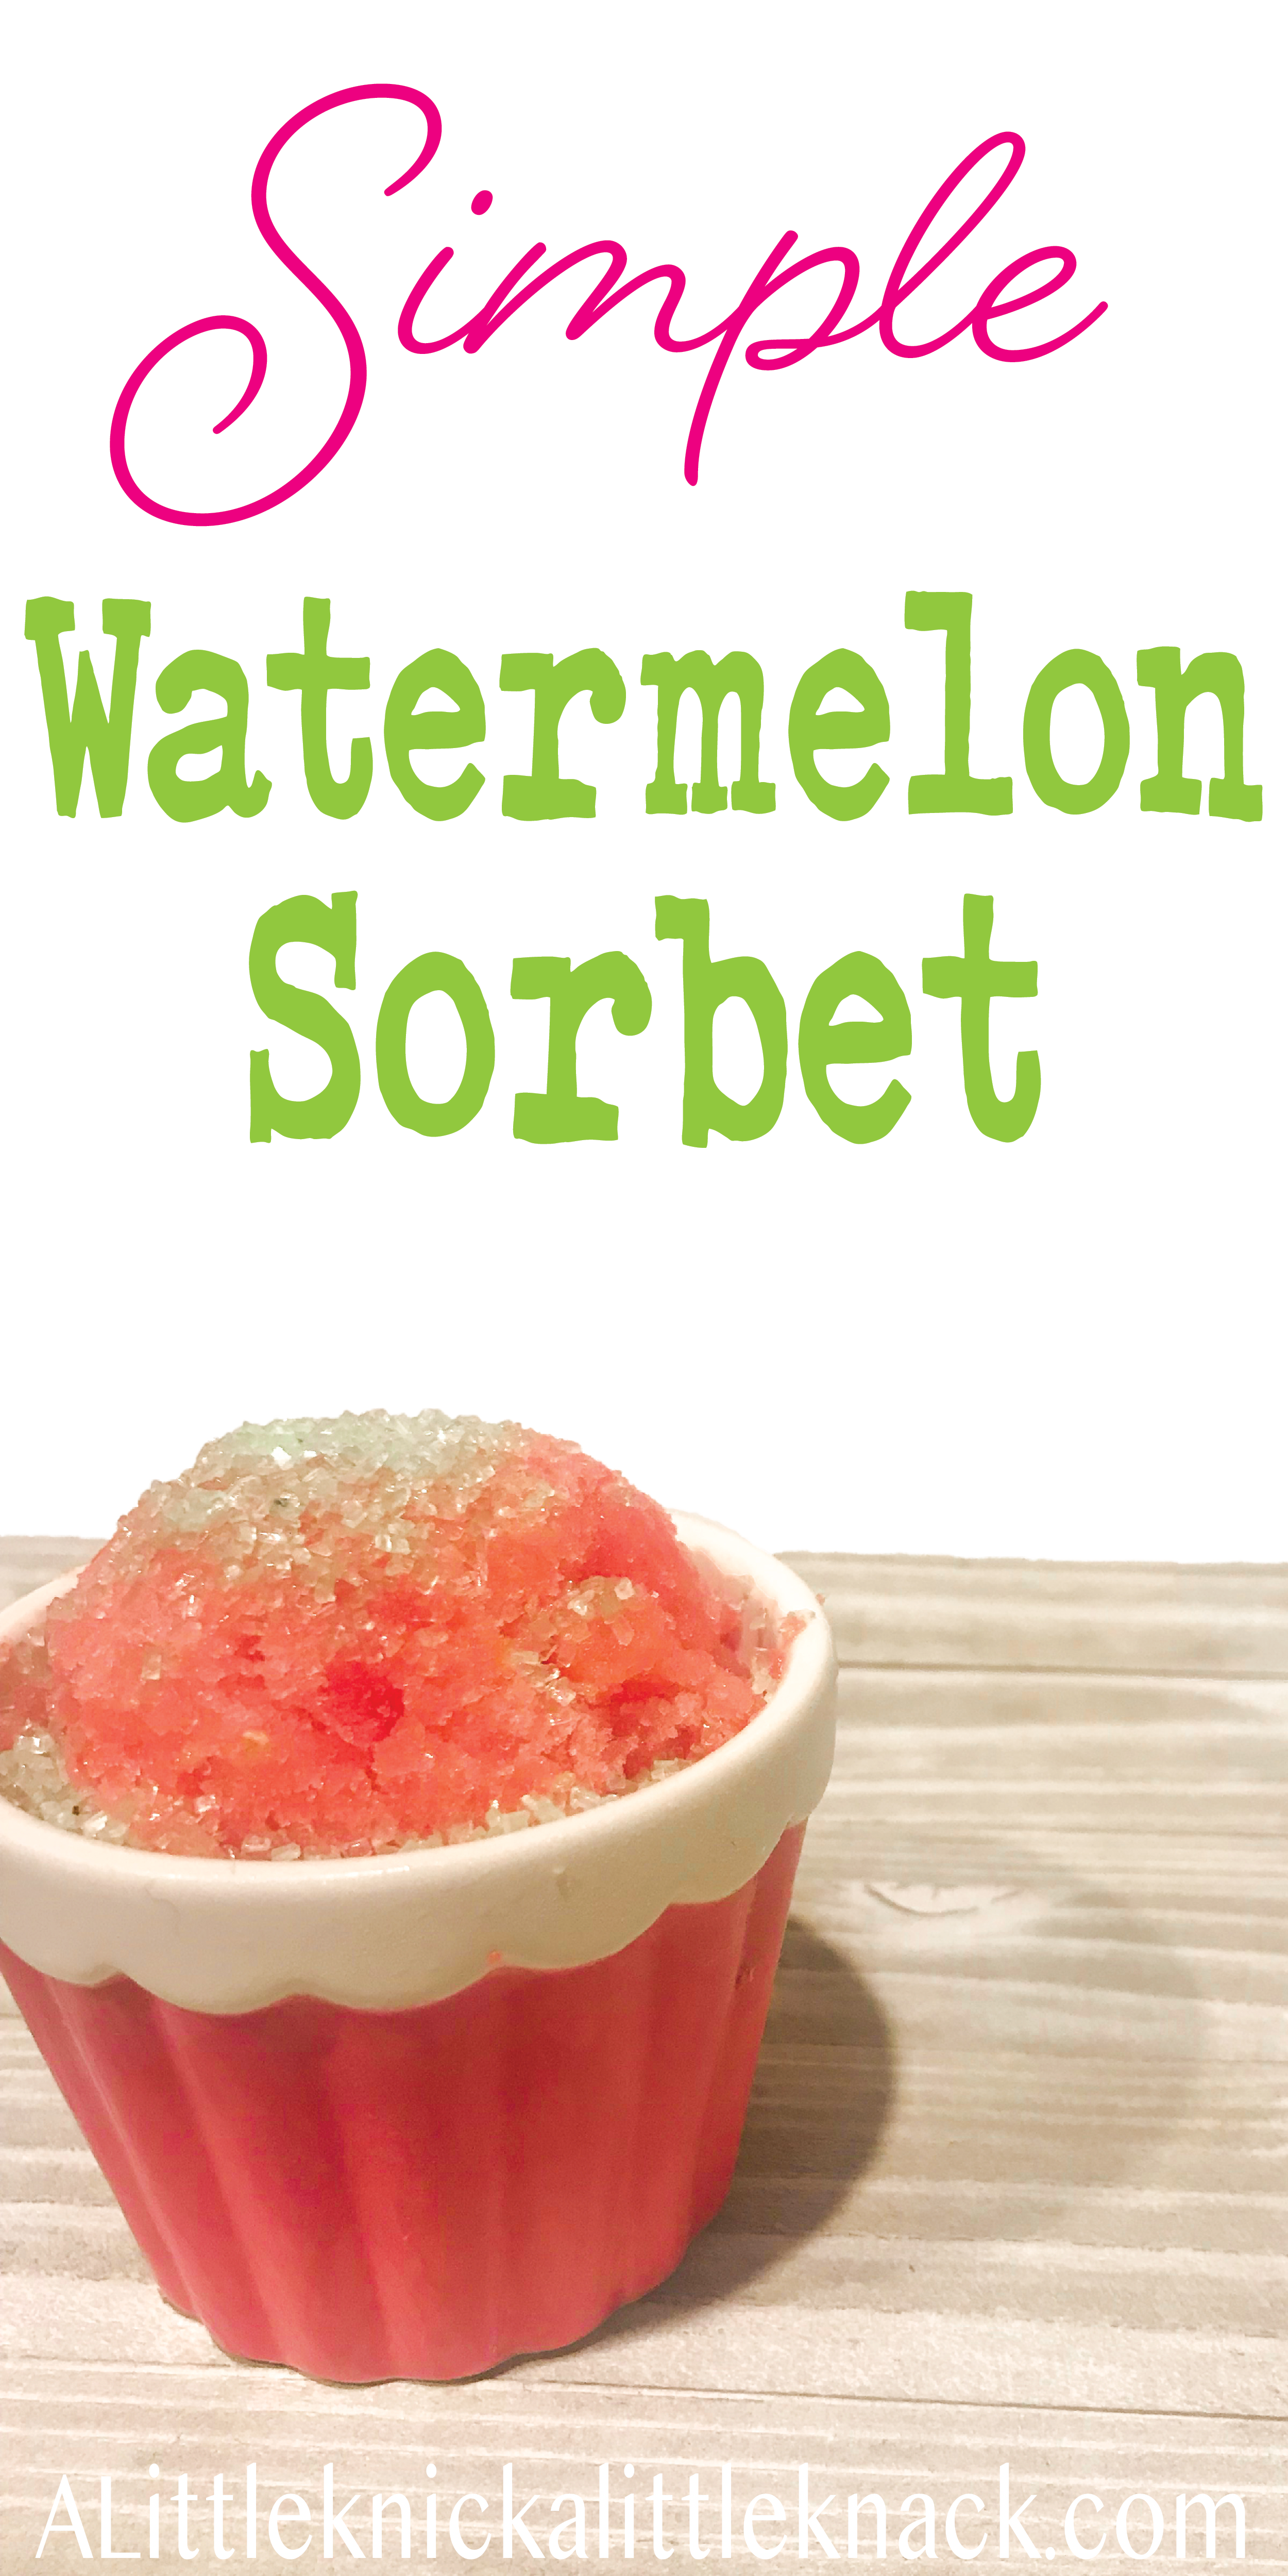 Watermelon sorbet with green sugar sprinkles and a text overlay.